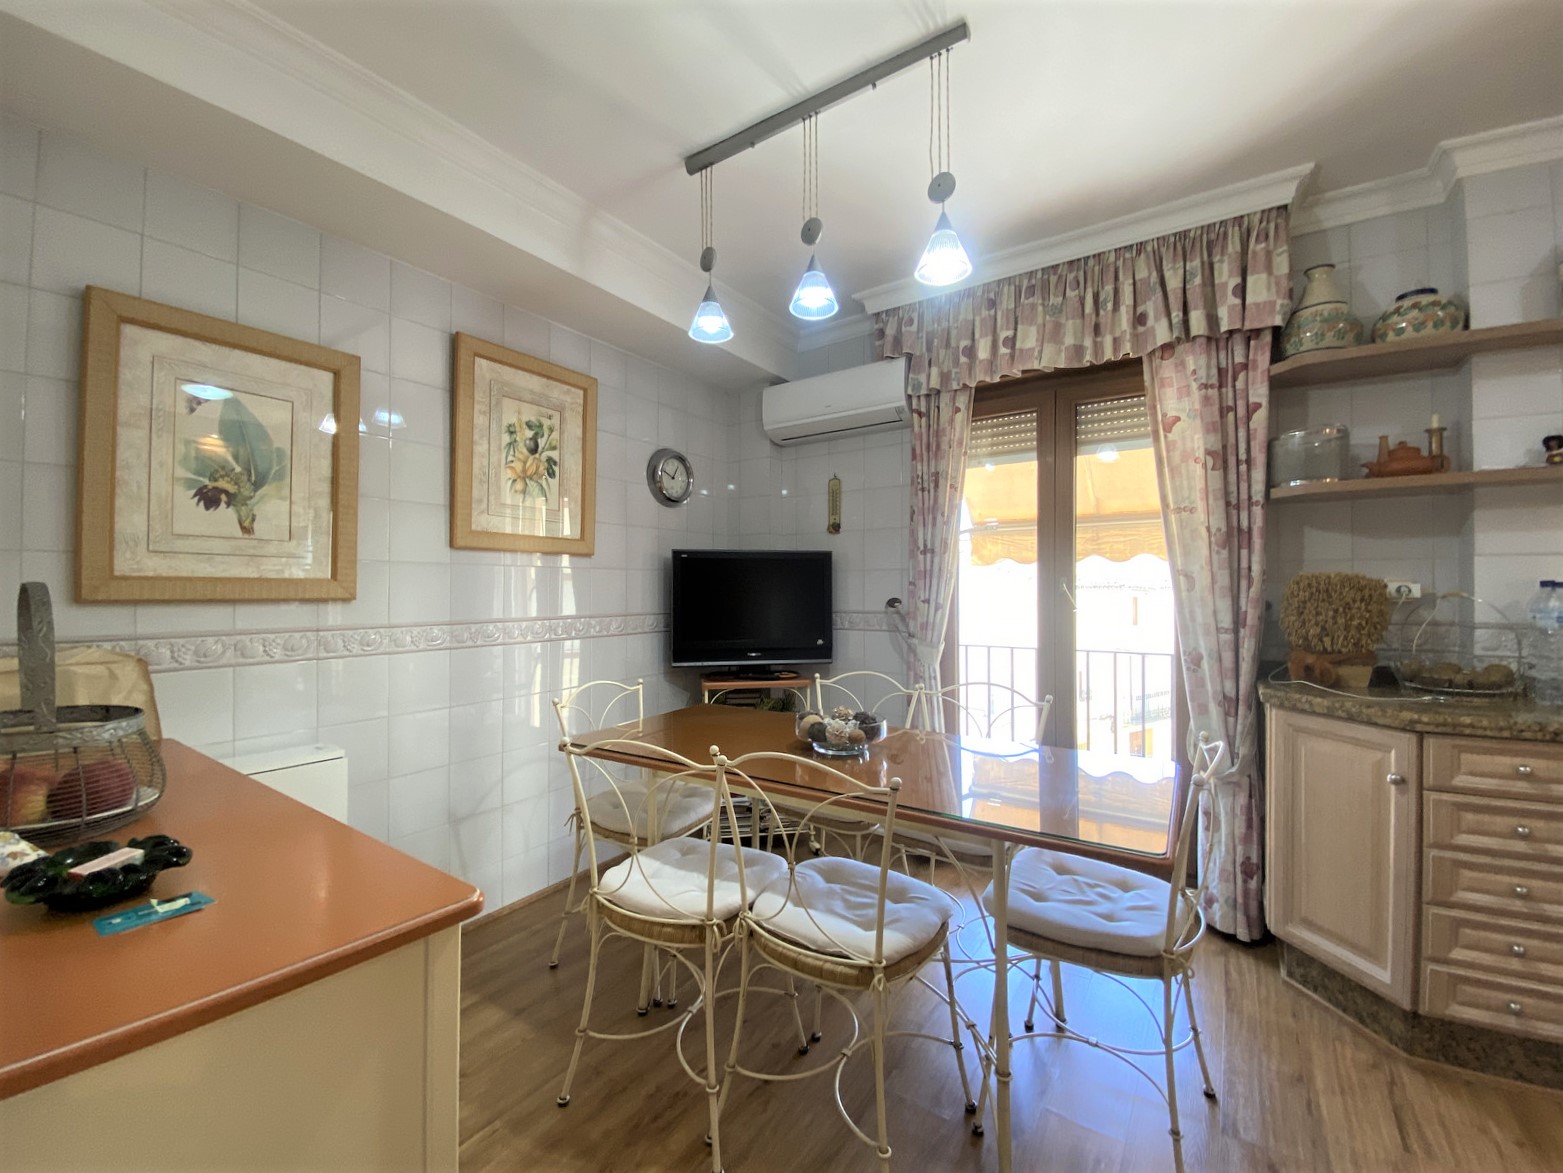 Centrally located apartment with 5 bedrooms.